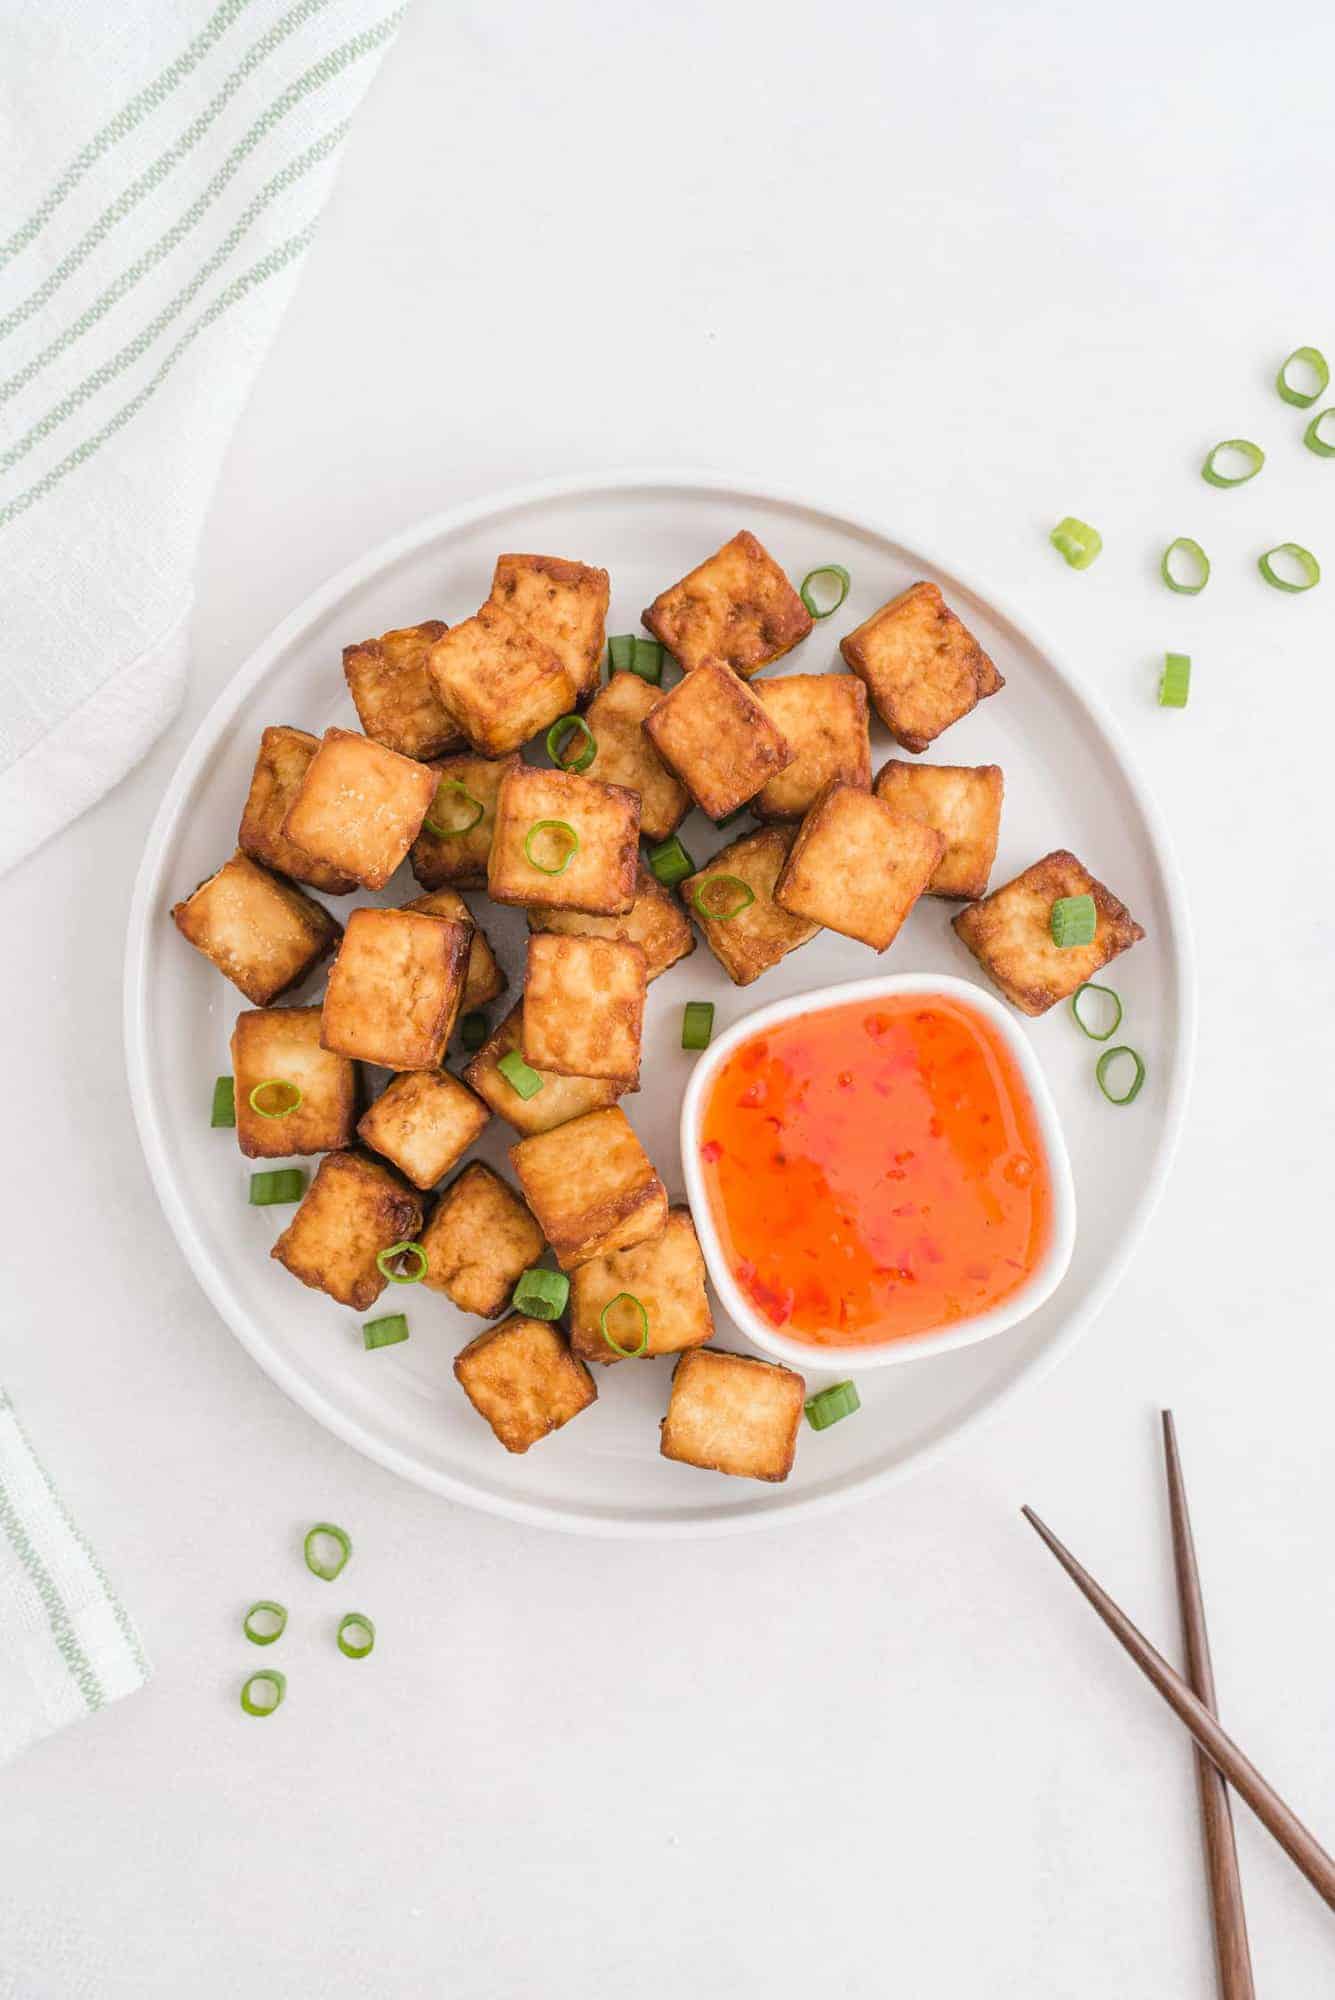 Cooked tofu on a plate with sweet chili sauce and green onions.